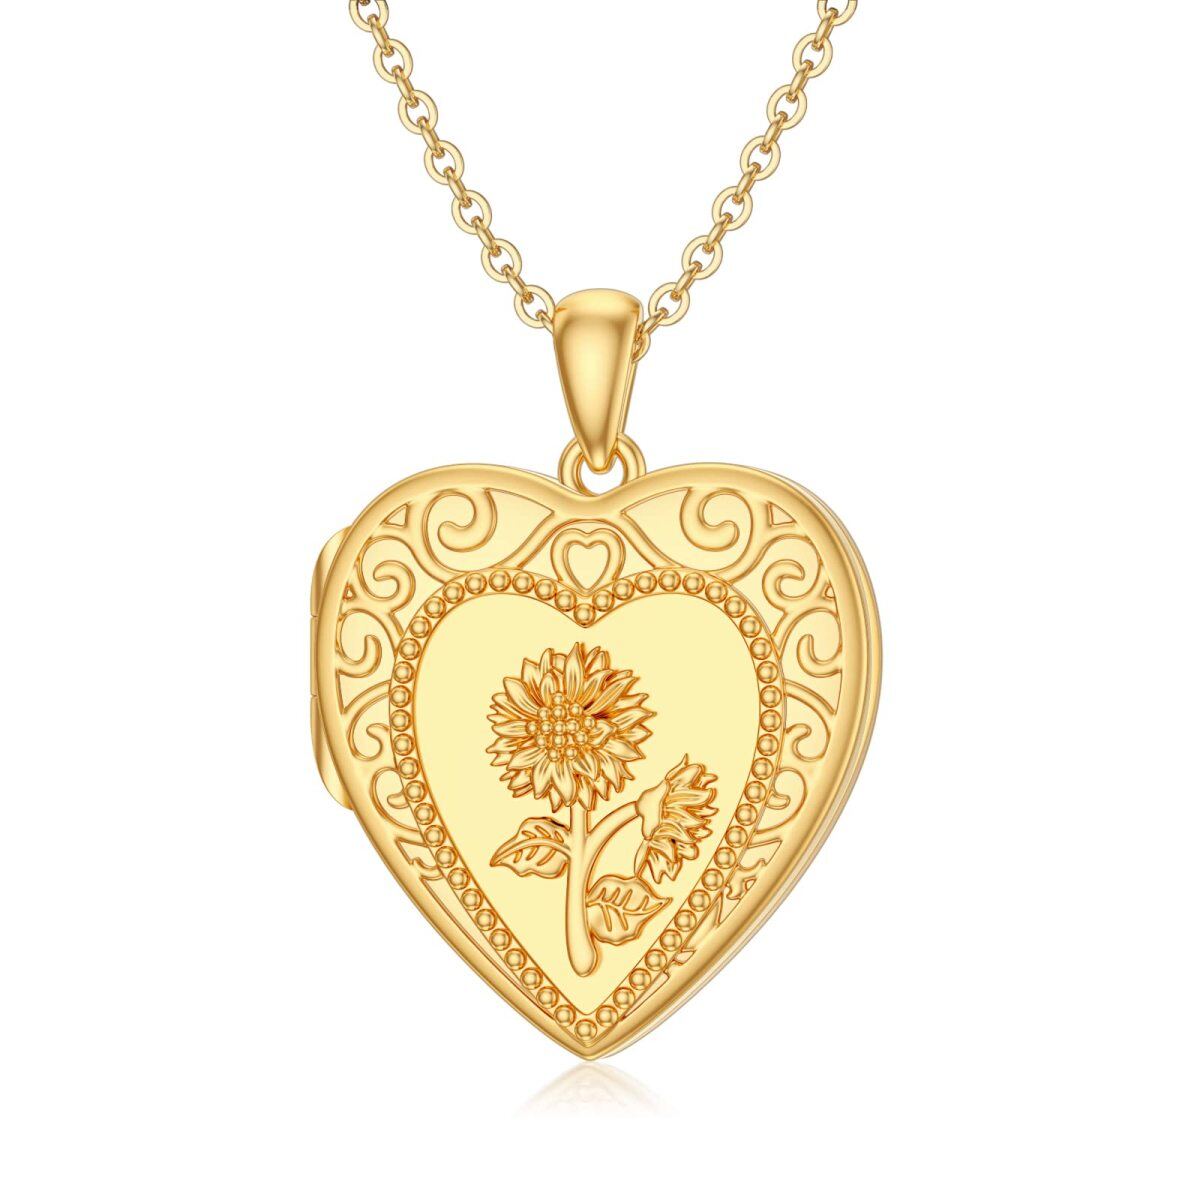 10K Gold Personalized Photo & Heart Personalized Photo Locket Necklace-1